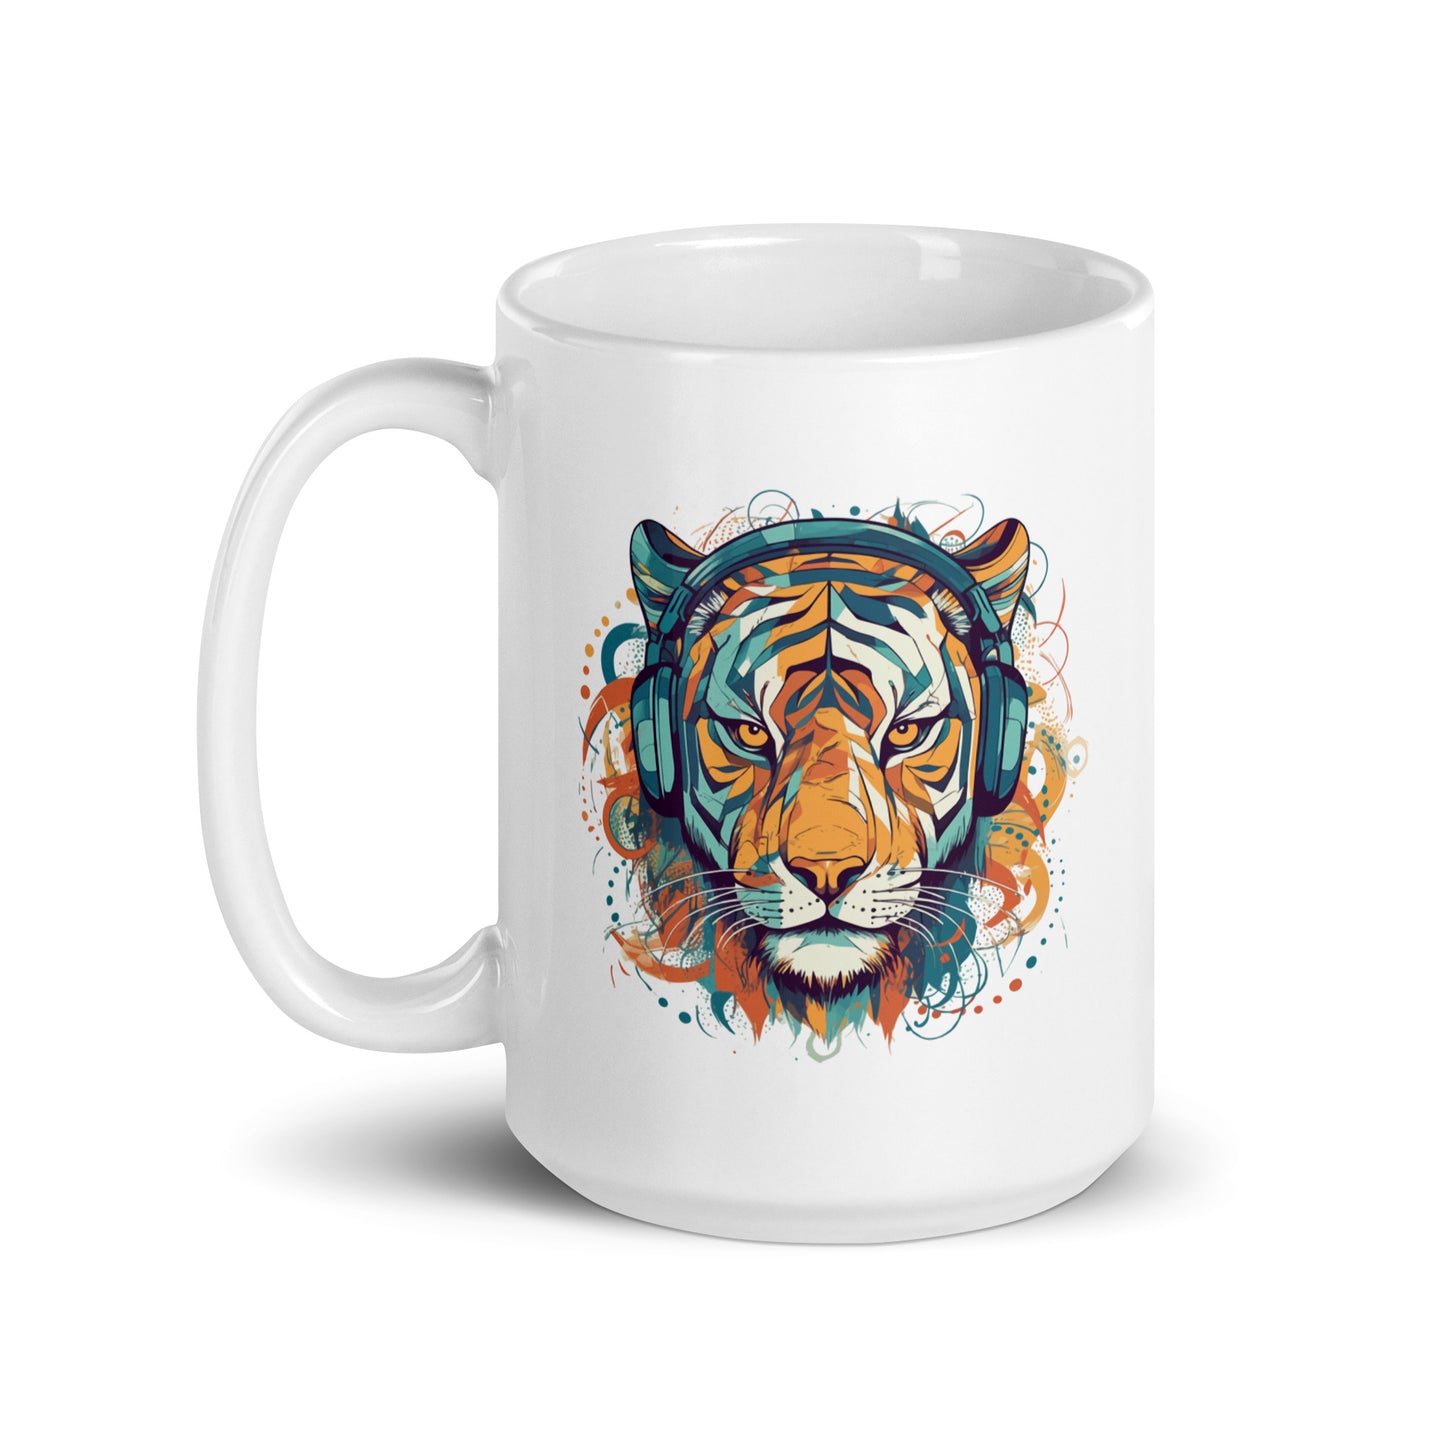 Fantastic portrait of tiger, Tiger colorful illustration in headphones, Music and animals - White glossy mug